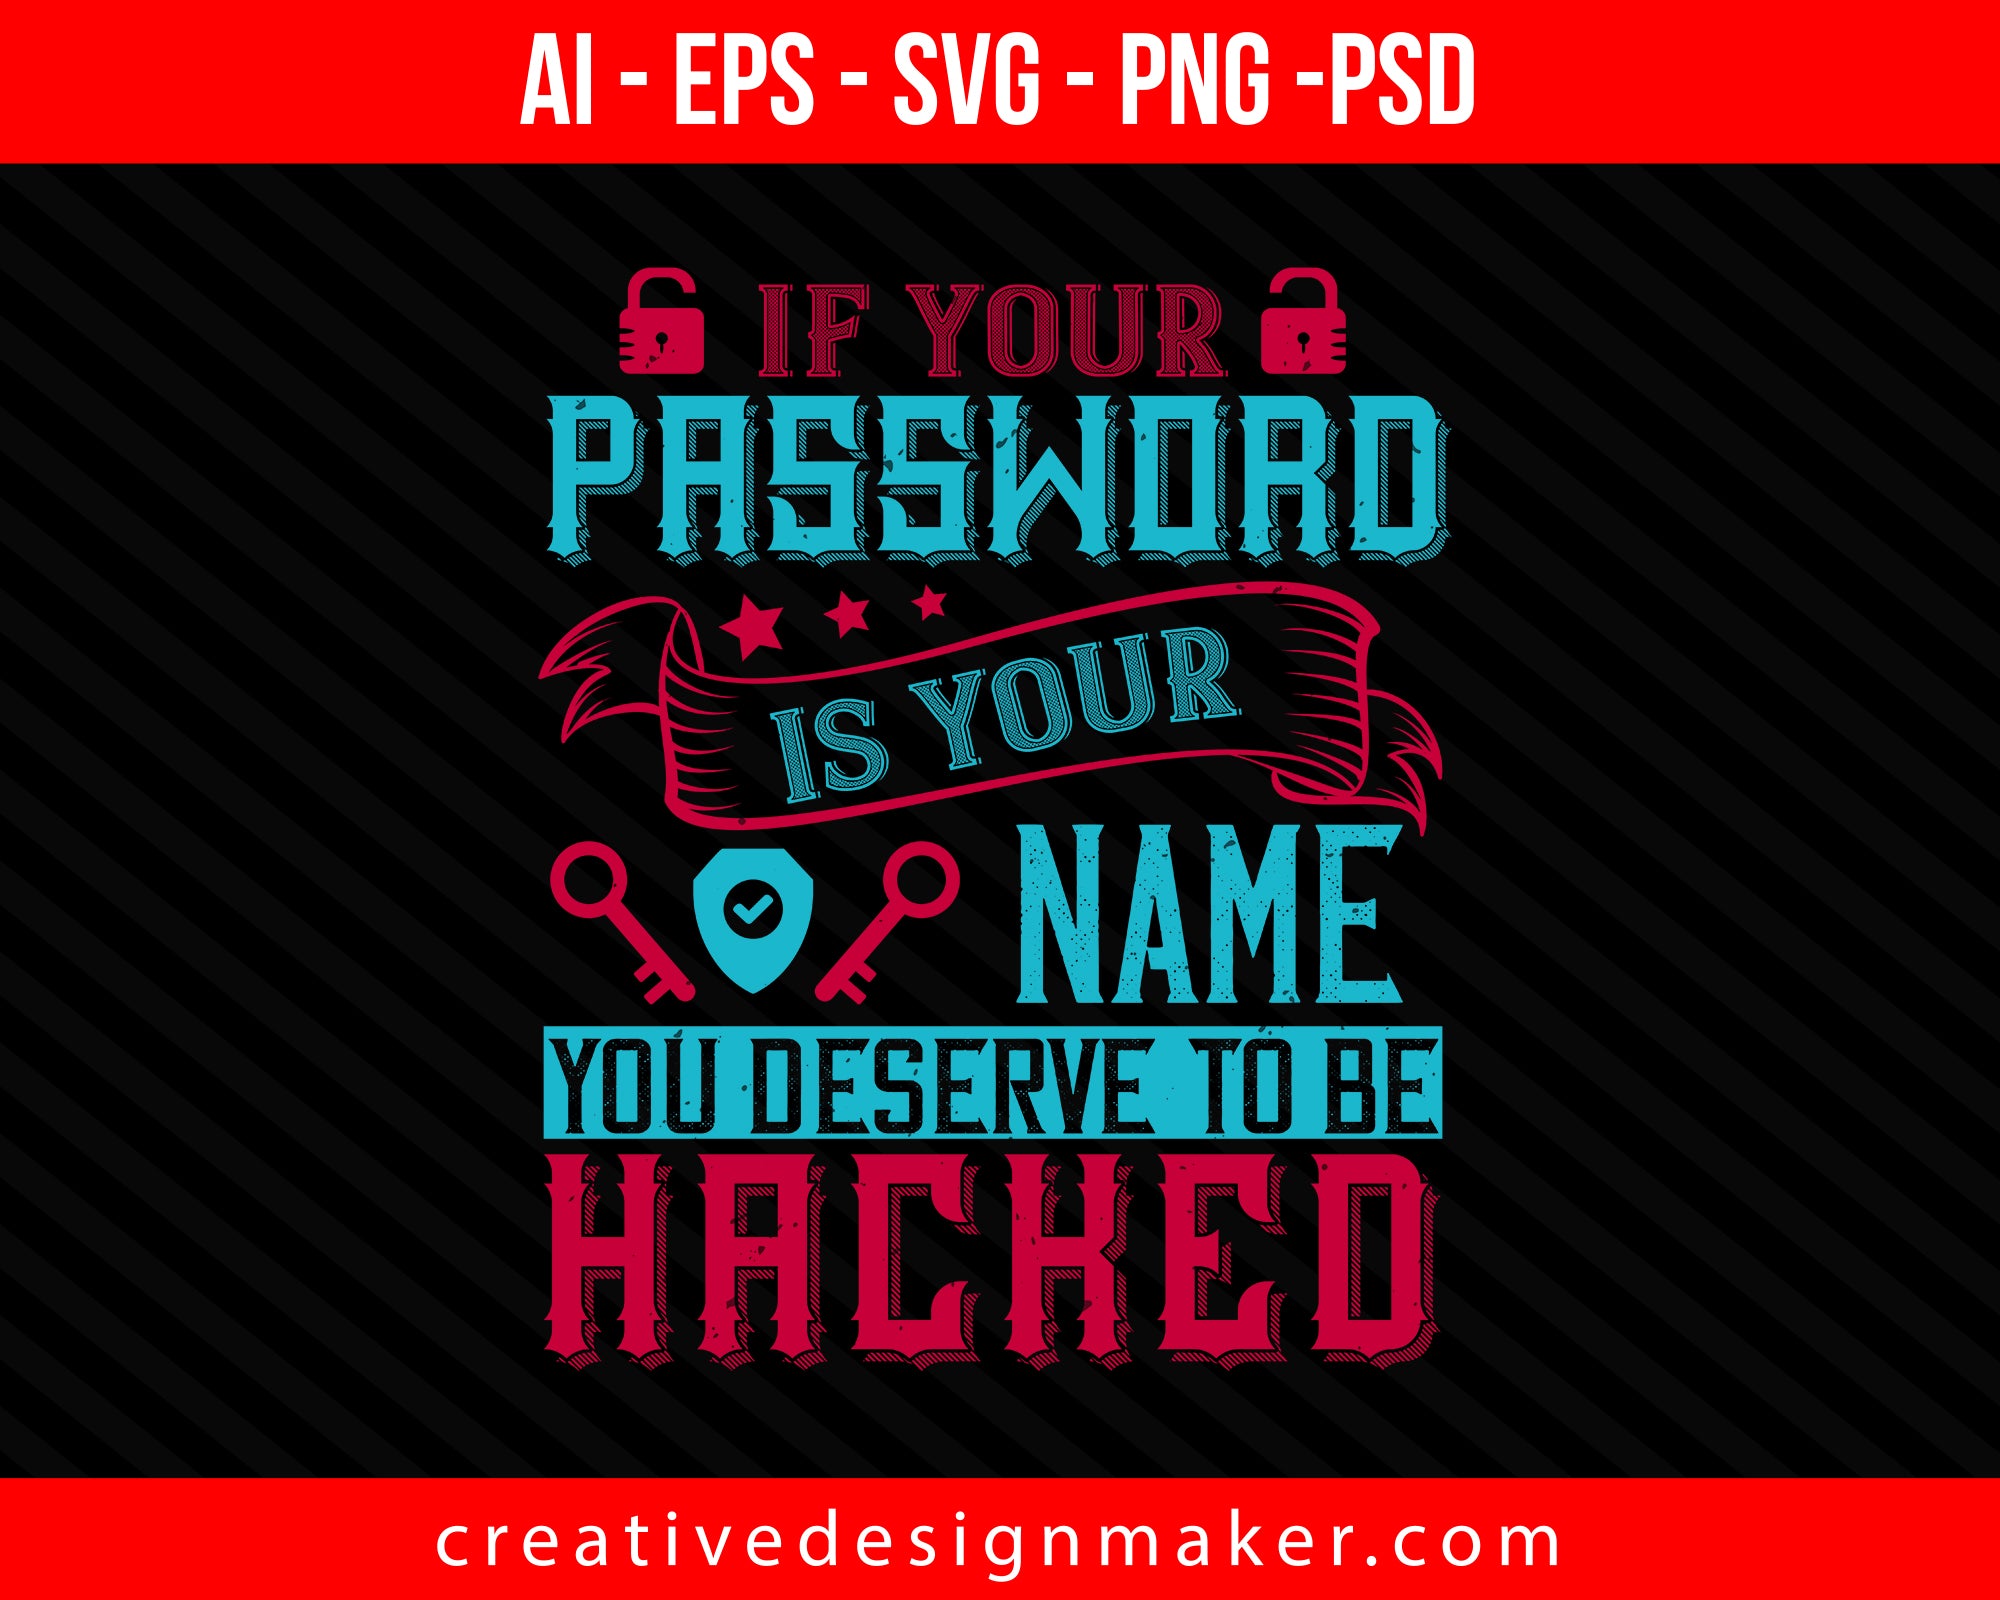 If your password is your name, you deserve to be hacked Internet Print Ready Editable T-Shirt SVG Design!